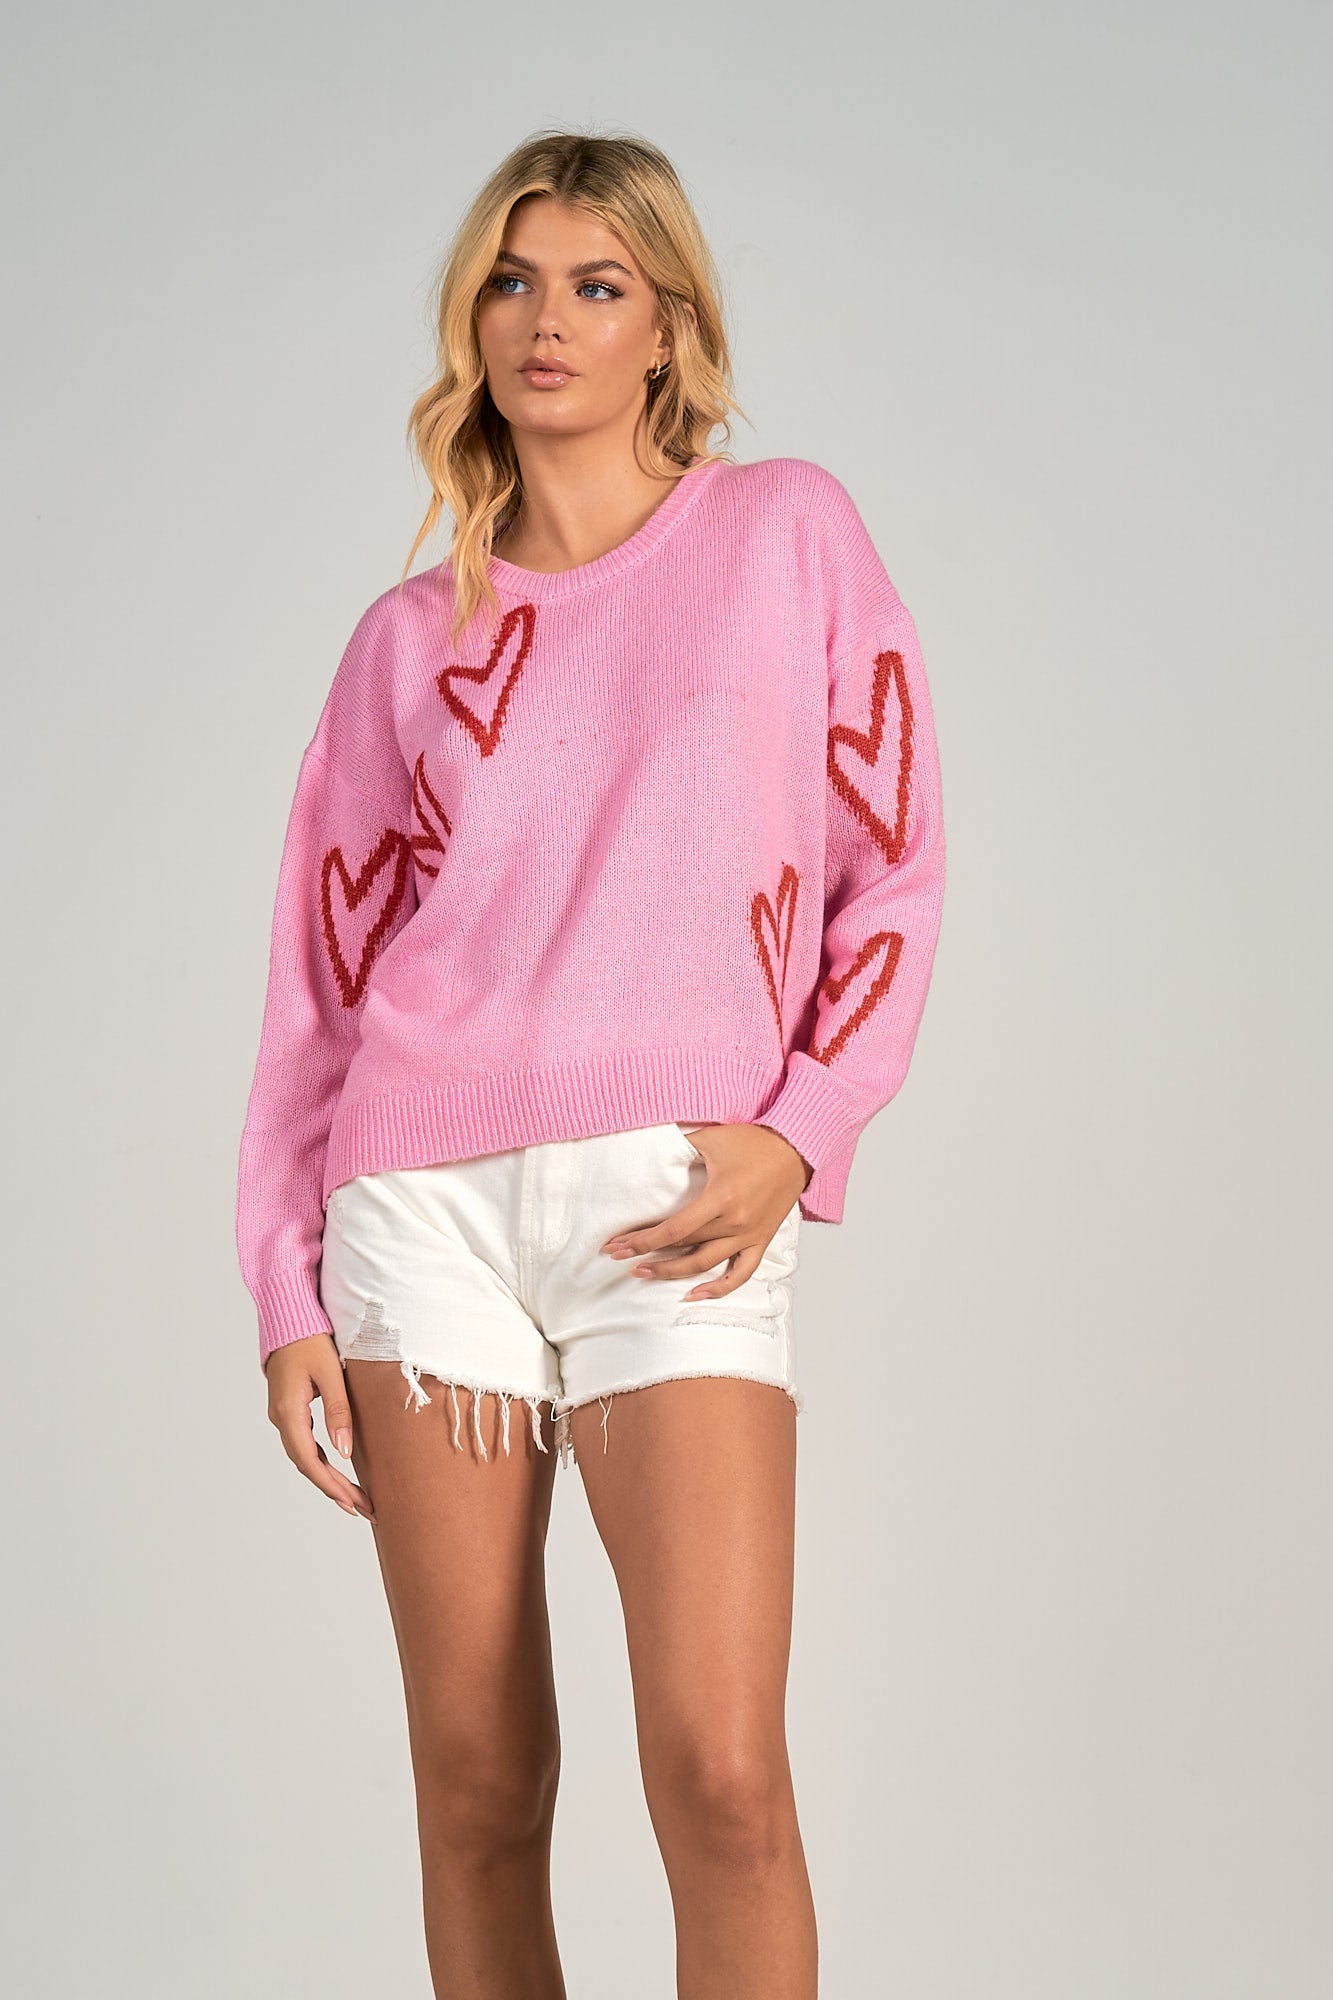 Elan Pink Sweater with Hearts